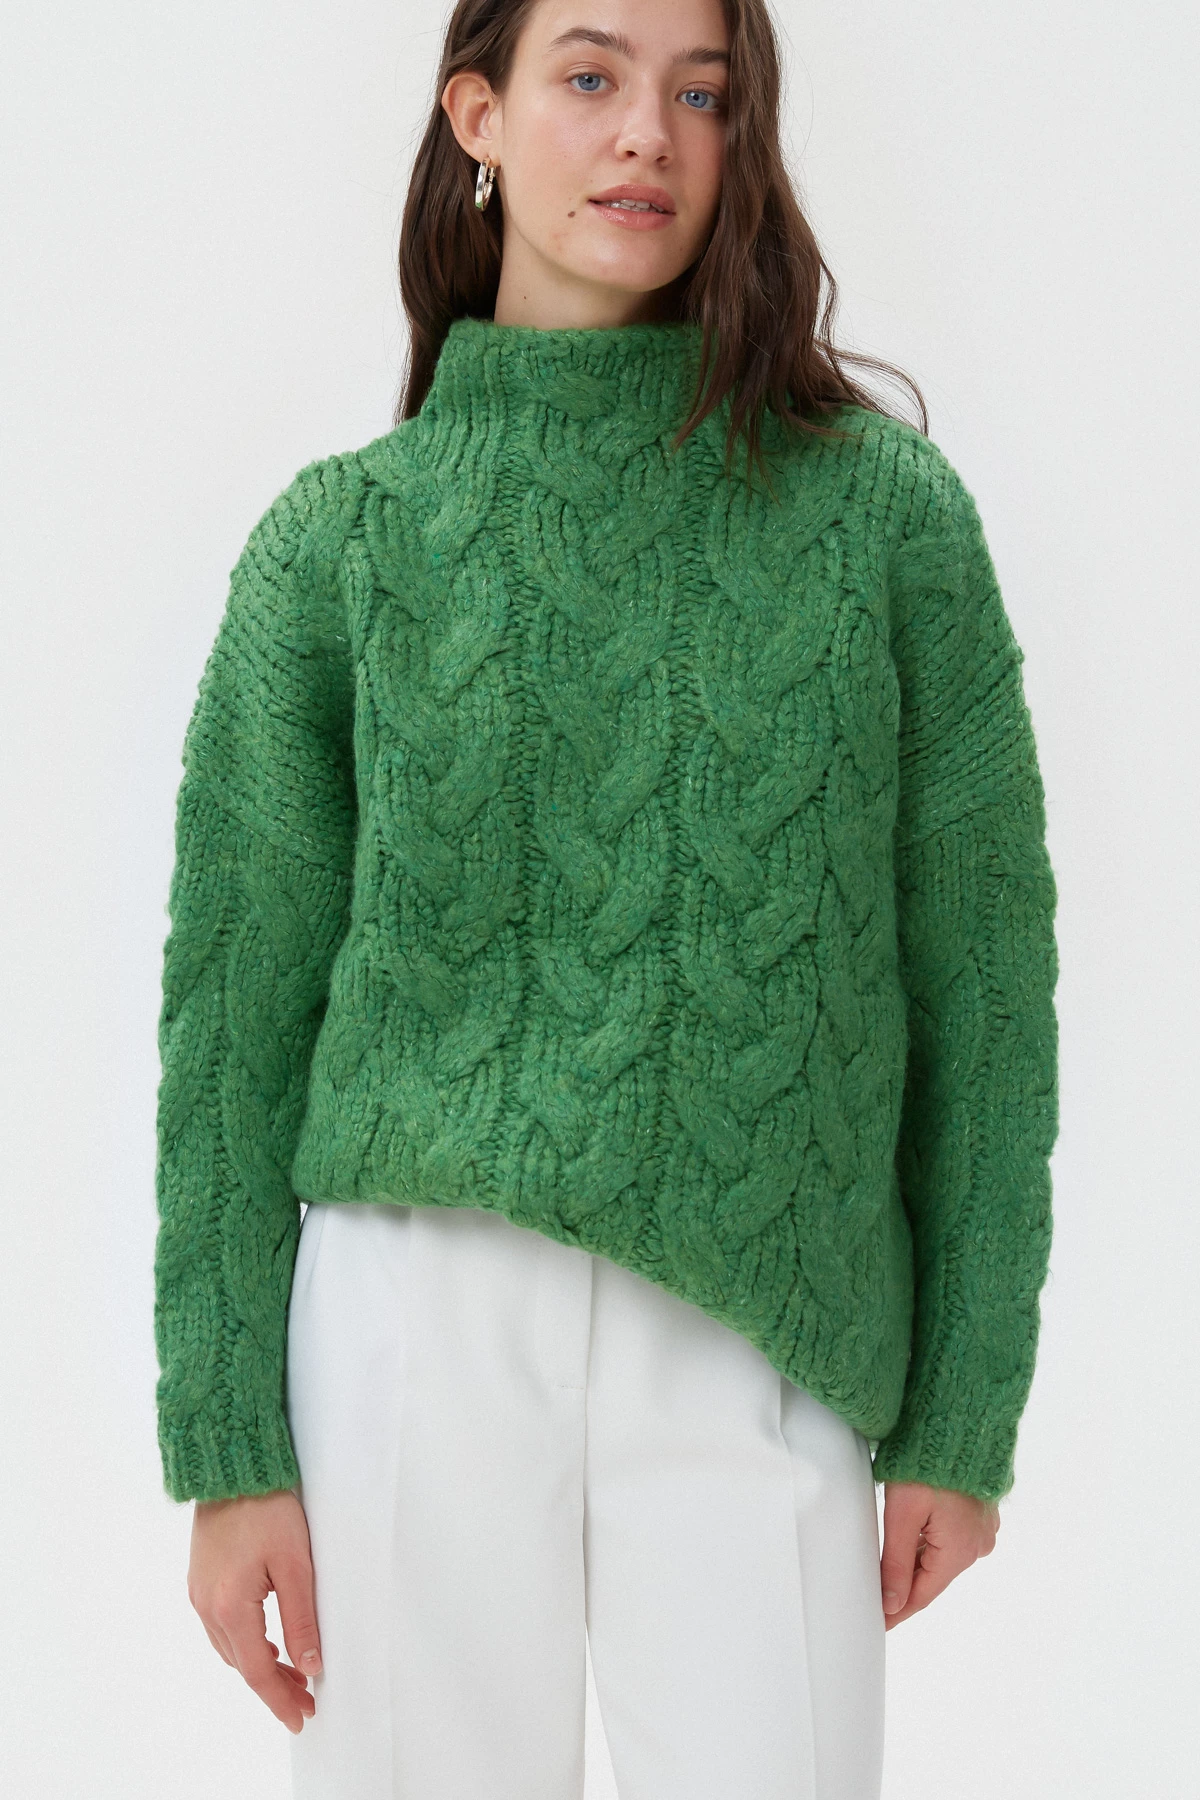 Green elongated sweater in "braids" with cotton, photo 5